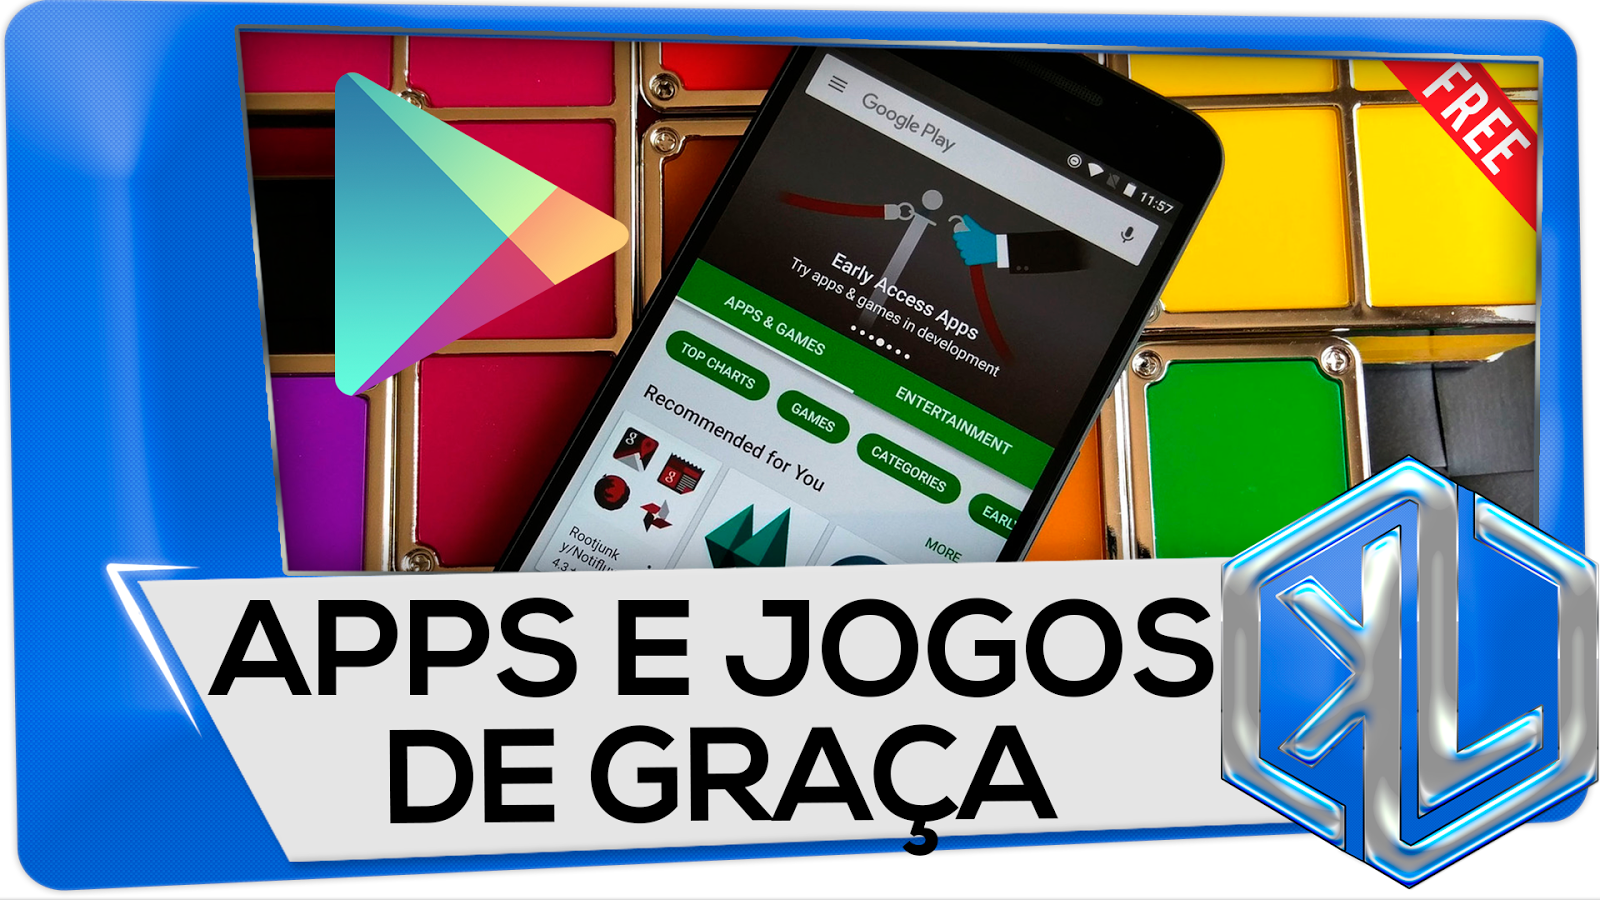 7games android games br